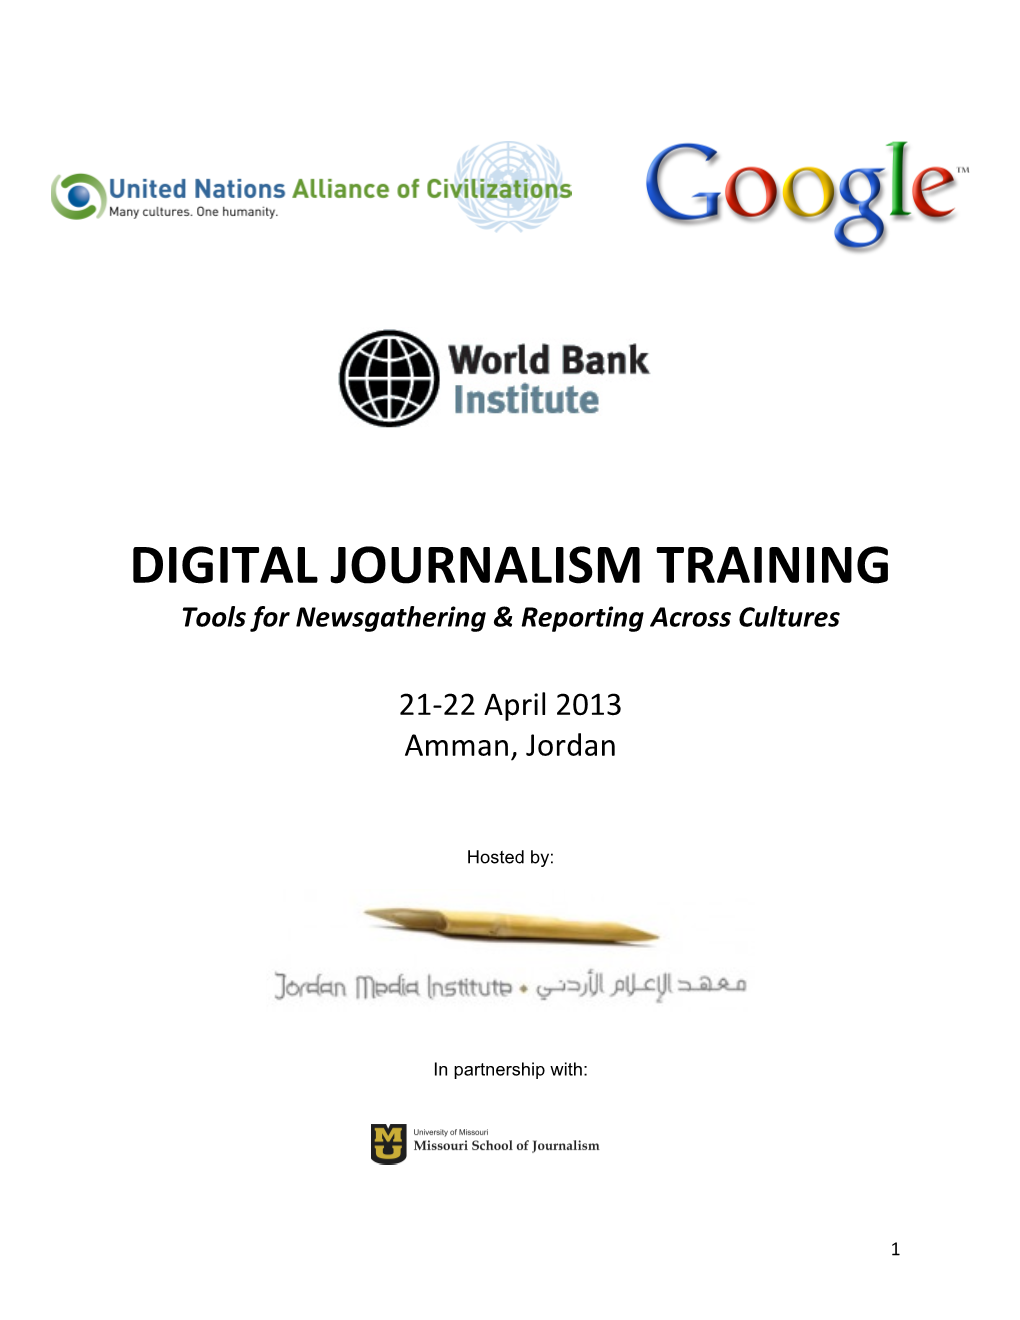 DIGITAL JOURNALISM TRAINING Tools for Newsgathering & Reporting Across Cultures